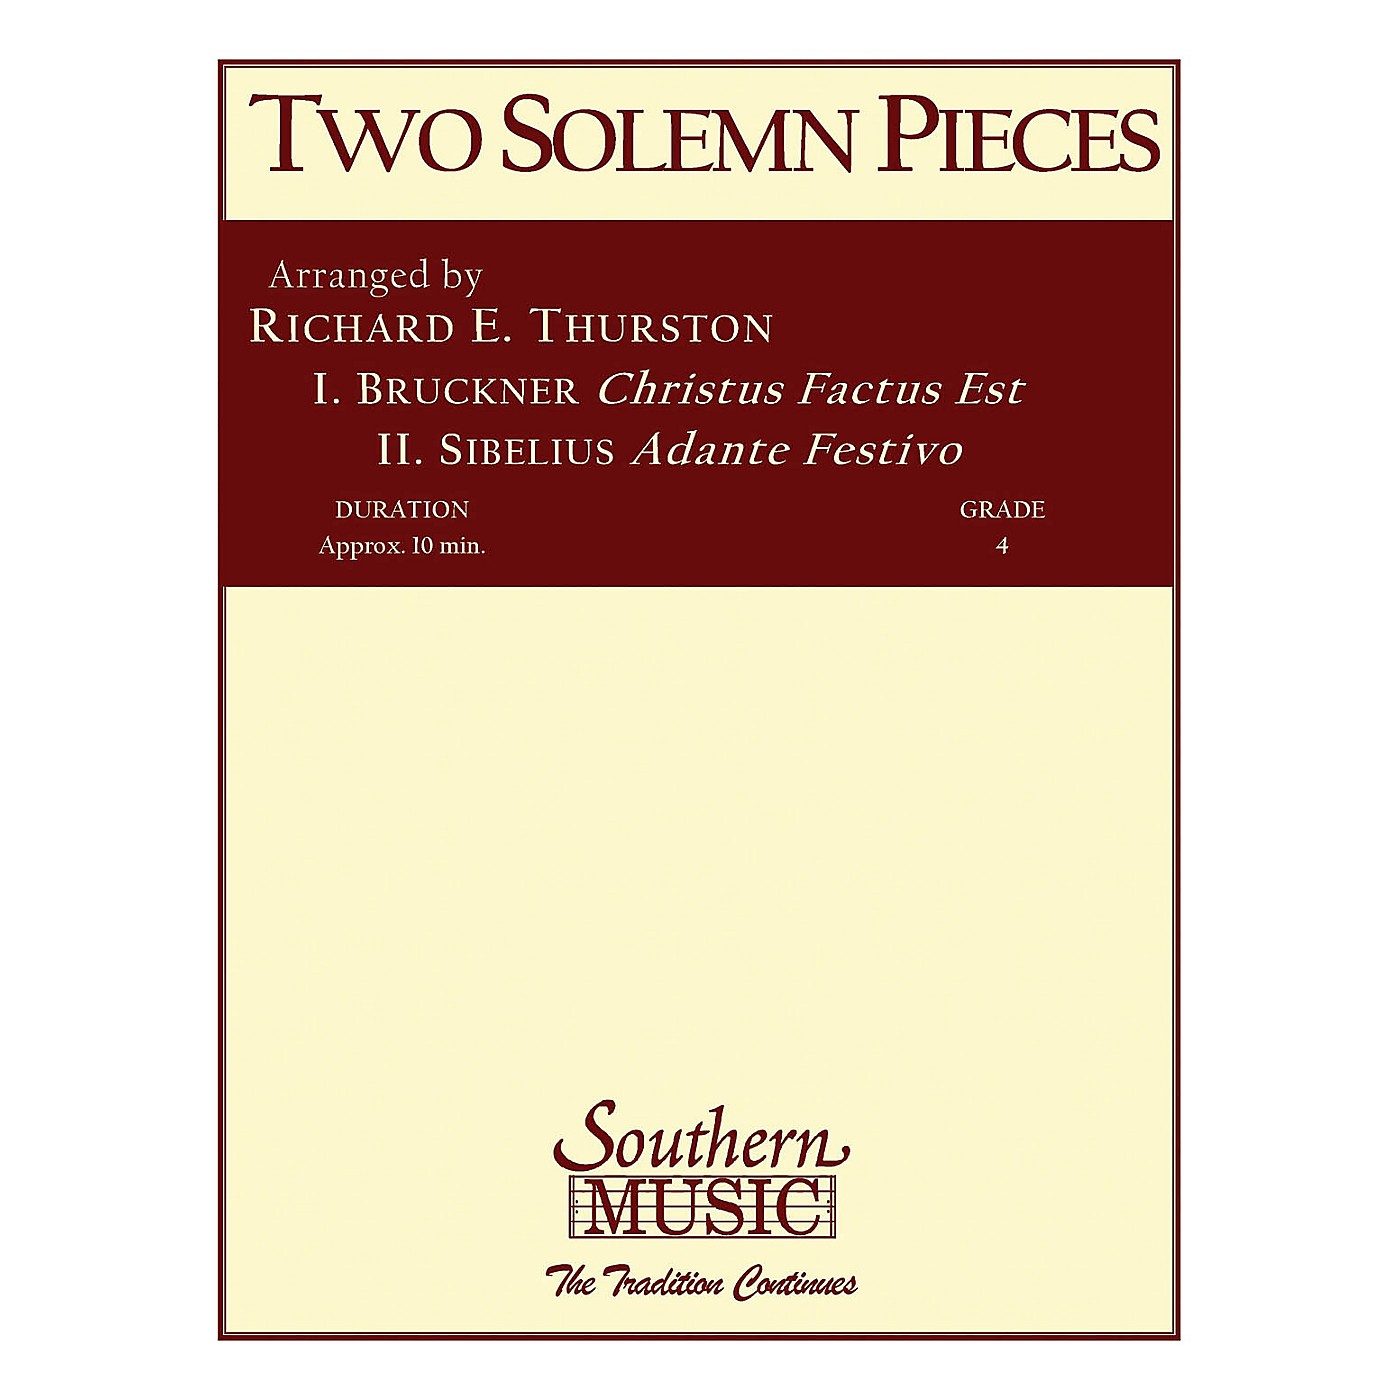 Southern Two Solemn Pieces (Band/Concert Band Music) Concert Band Level 4 Arranged by Richard Thurston thumbnail